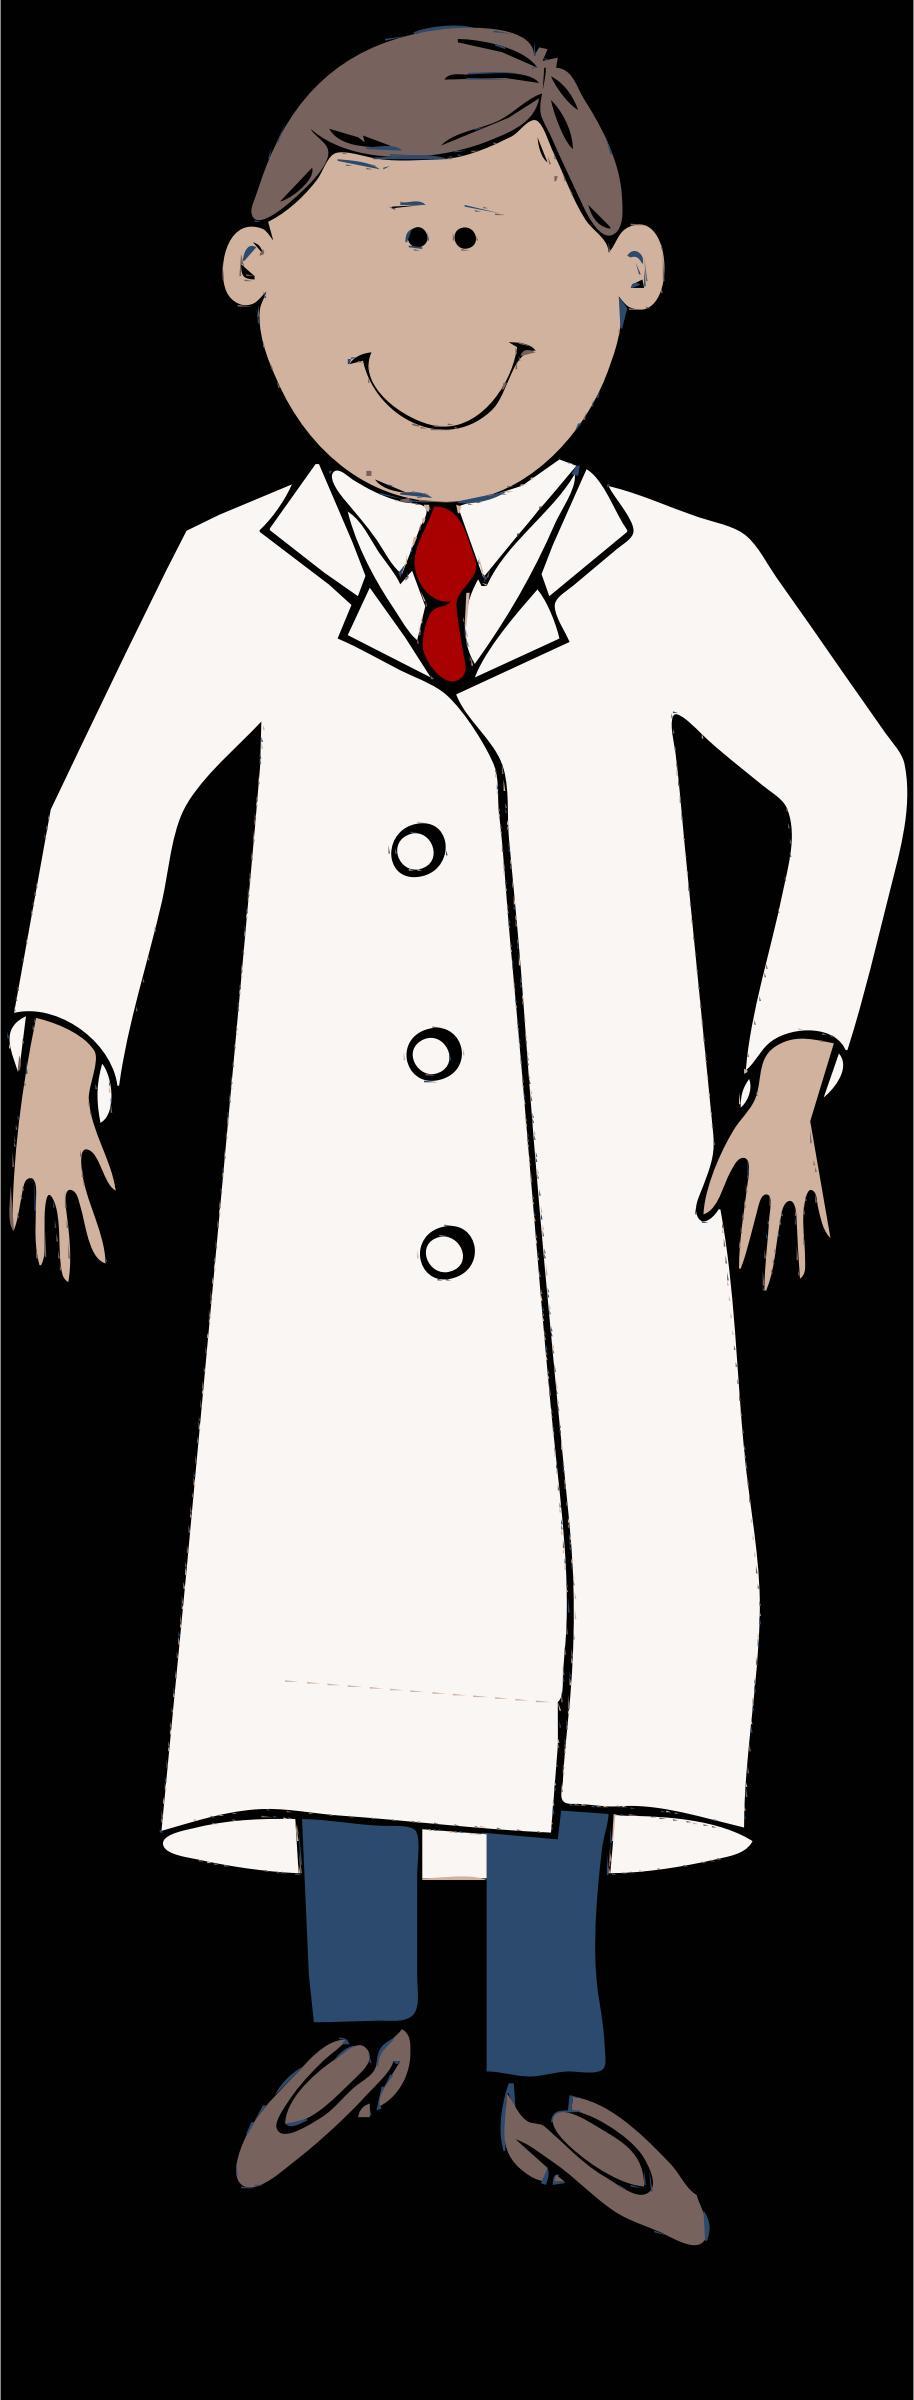 lab coat worn by scientist with red tie png transparent